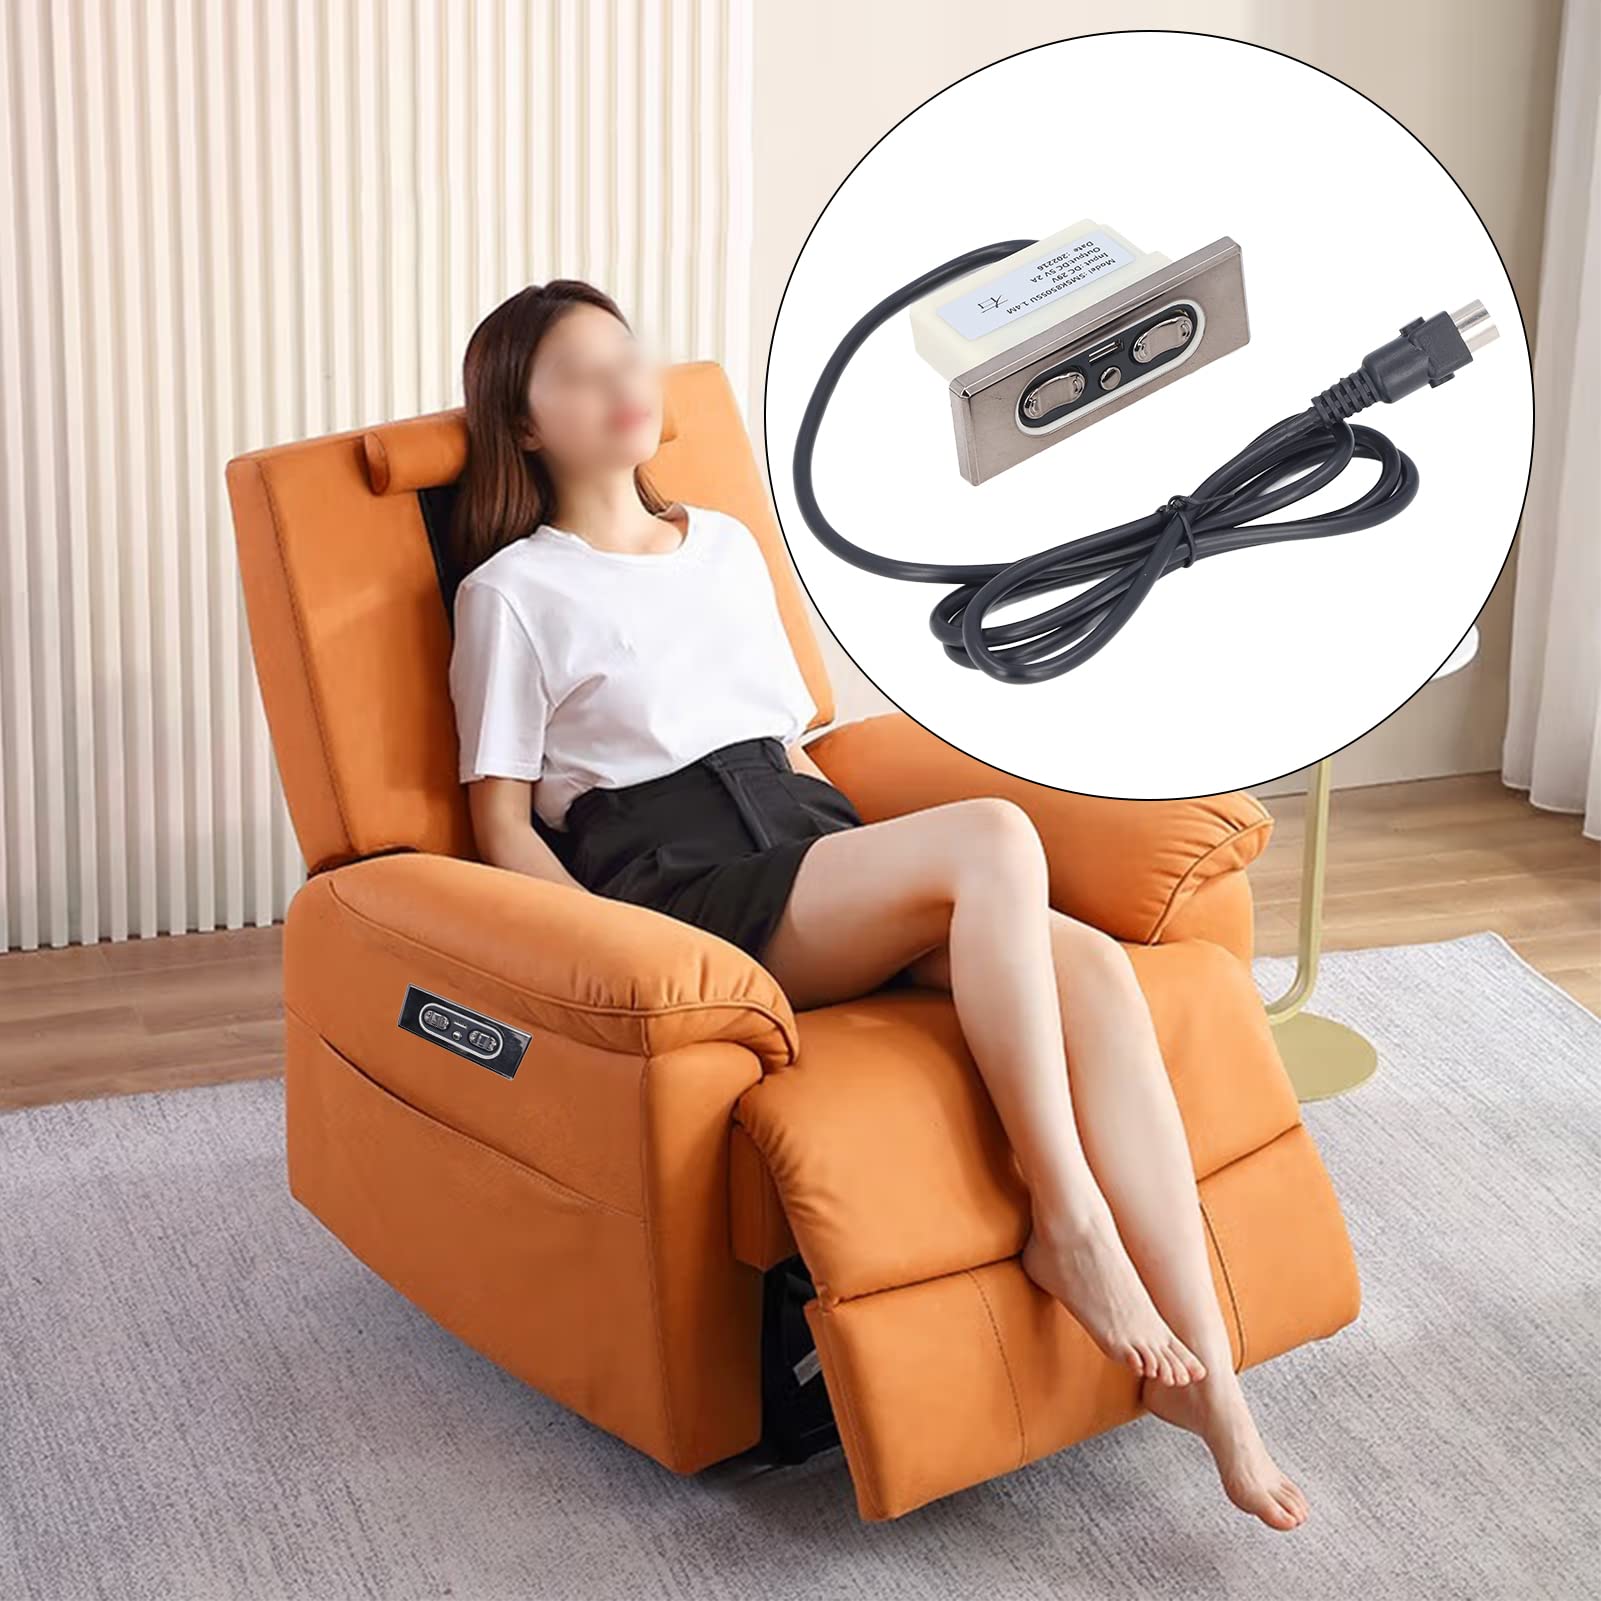 5 Button Electric Sofa Remote, Waterproof ABS Material Power Recliner or Lift Chair Hand Control with USB Charging Port, Plug and Play, One Button Reset Recliner Replacement Parts for Power Recliner